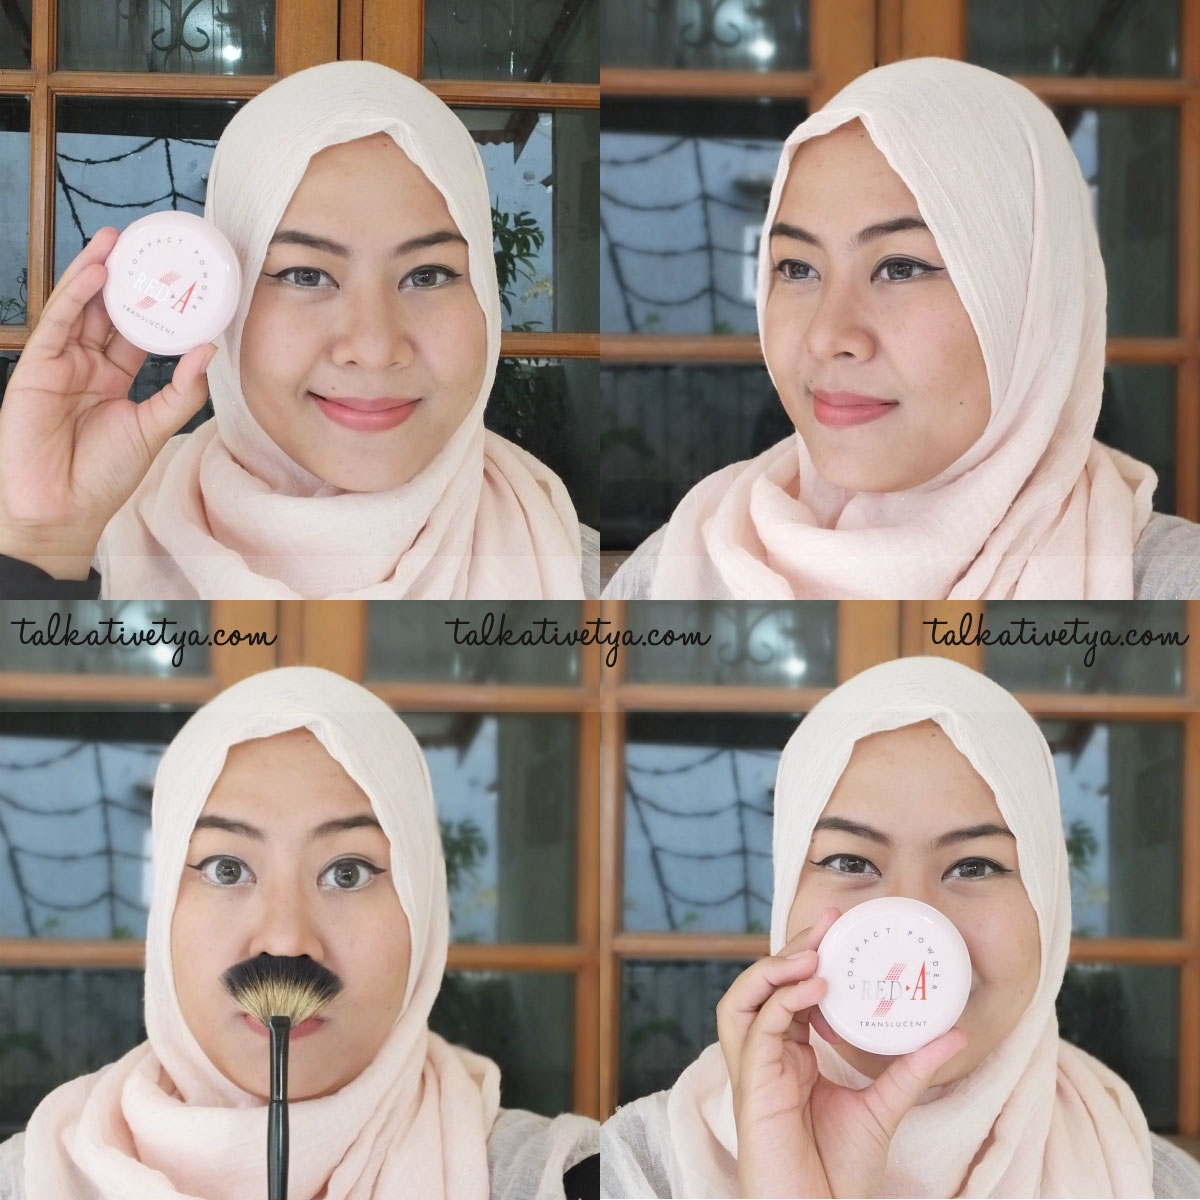 REVIEW RED A Compact Powder Translucent Talkative Tya